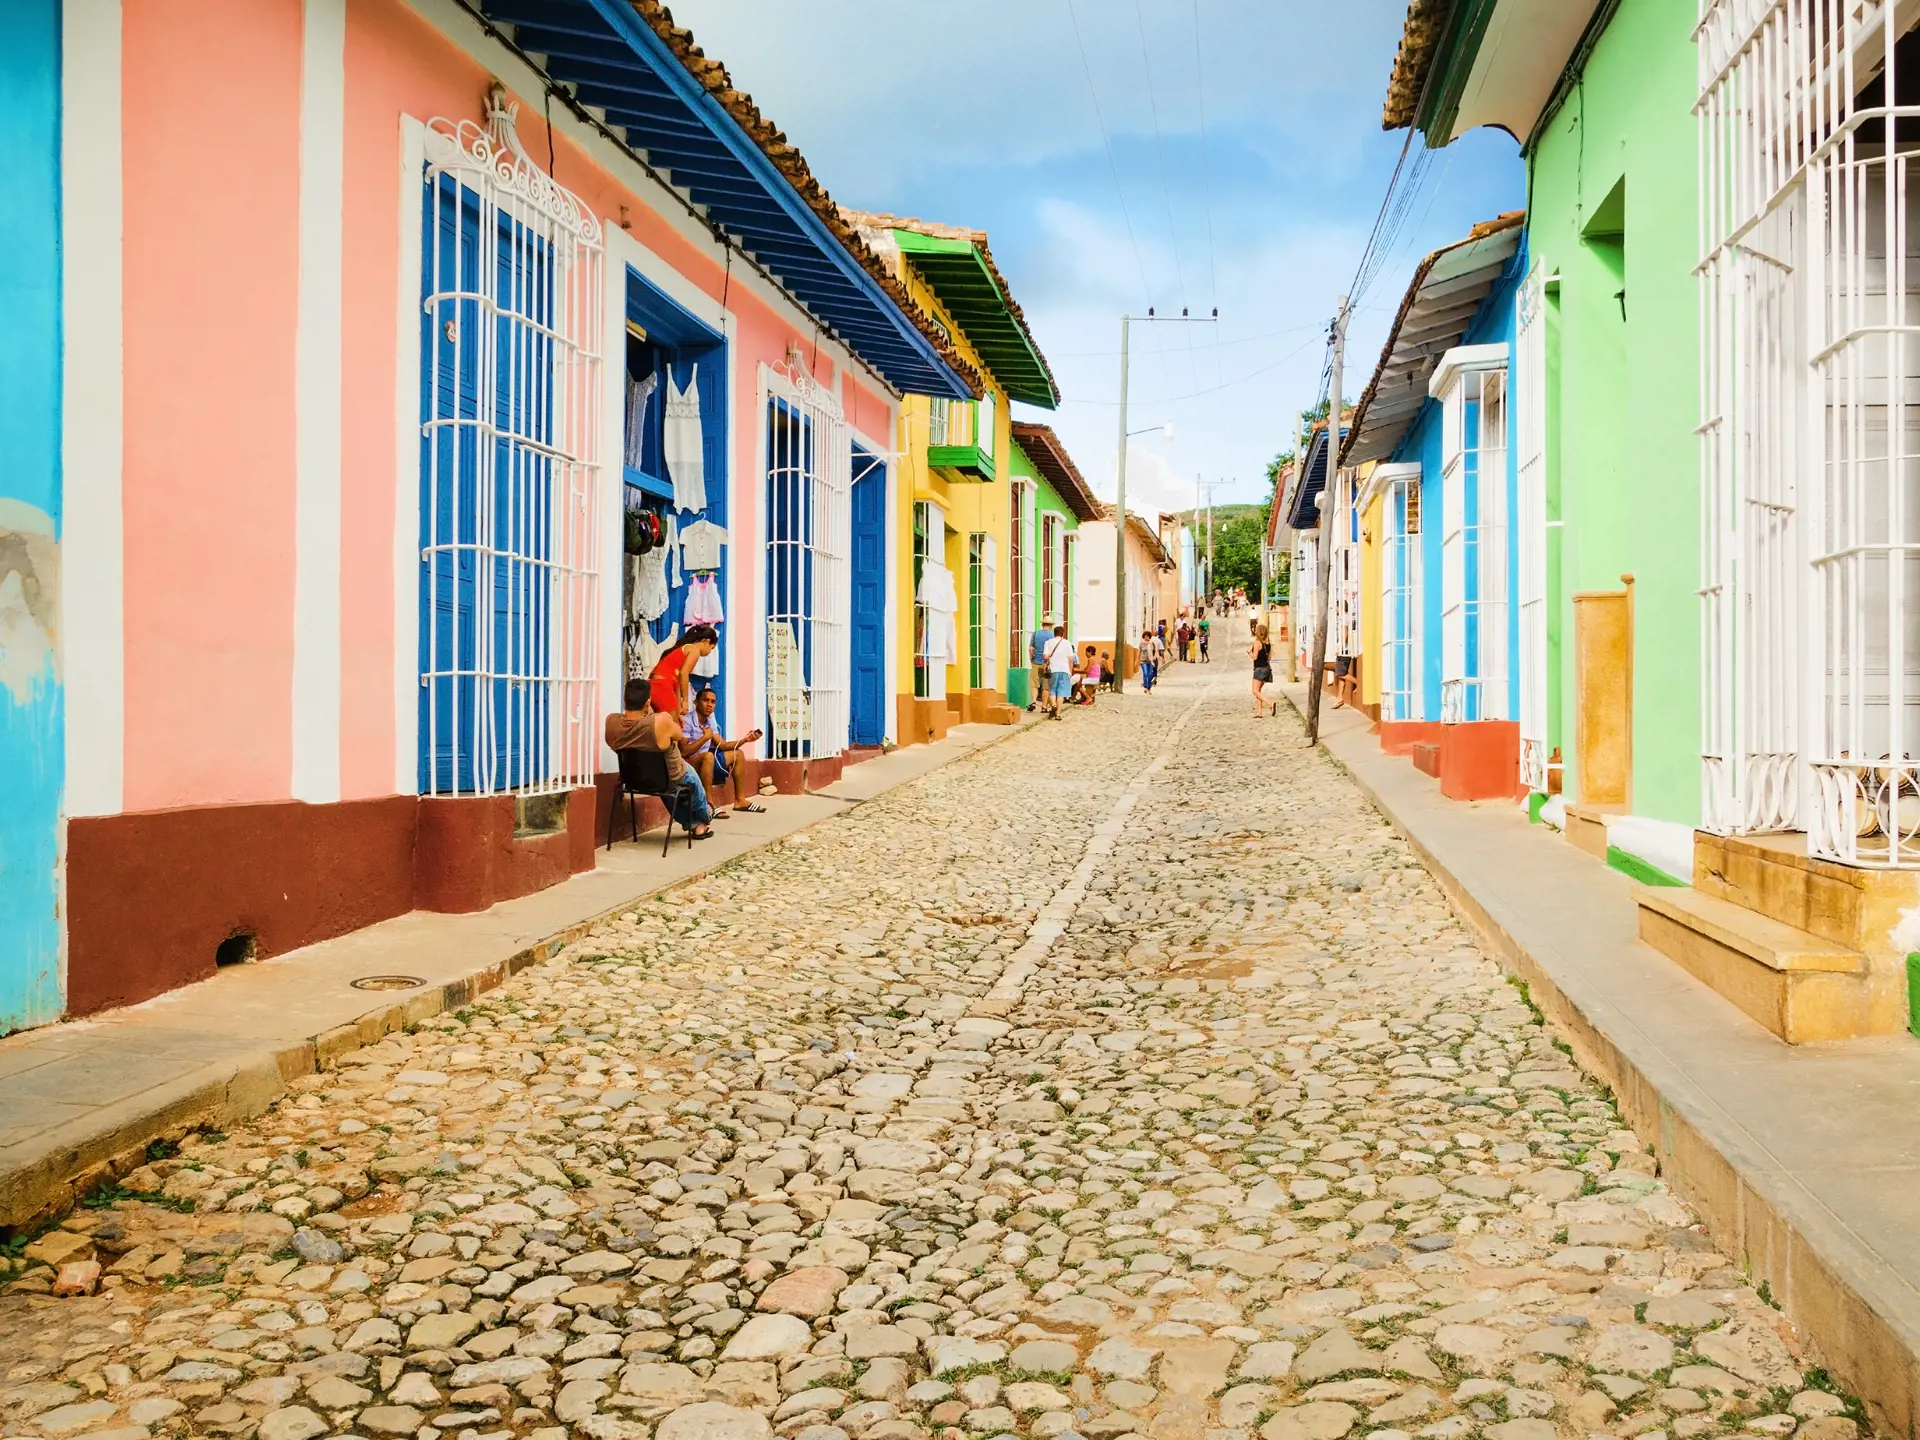 Colorful traditional houses in the colonial town of Trinidad in Cuba.jpg